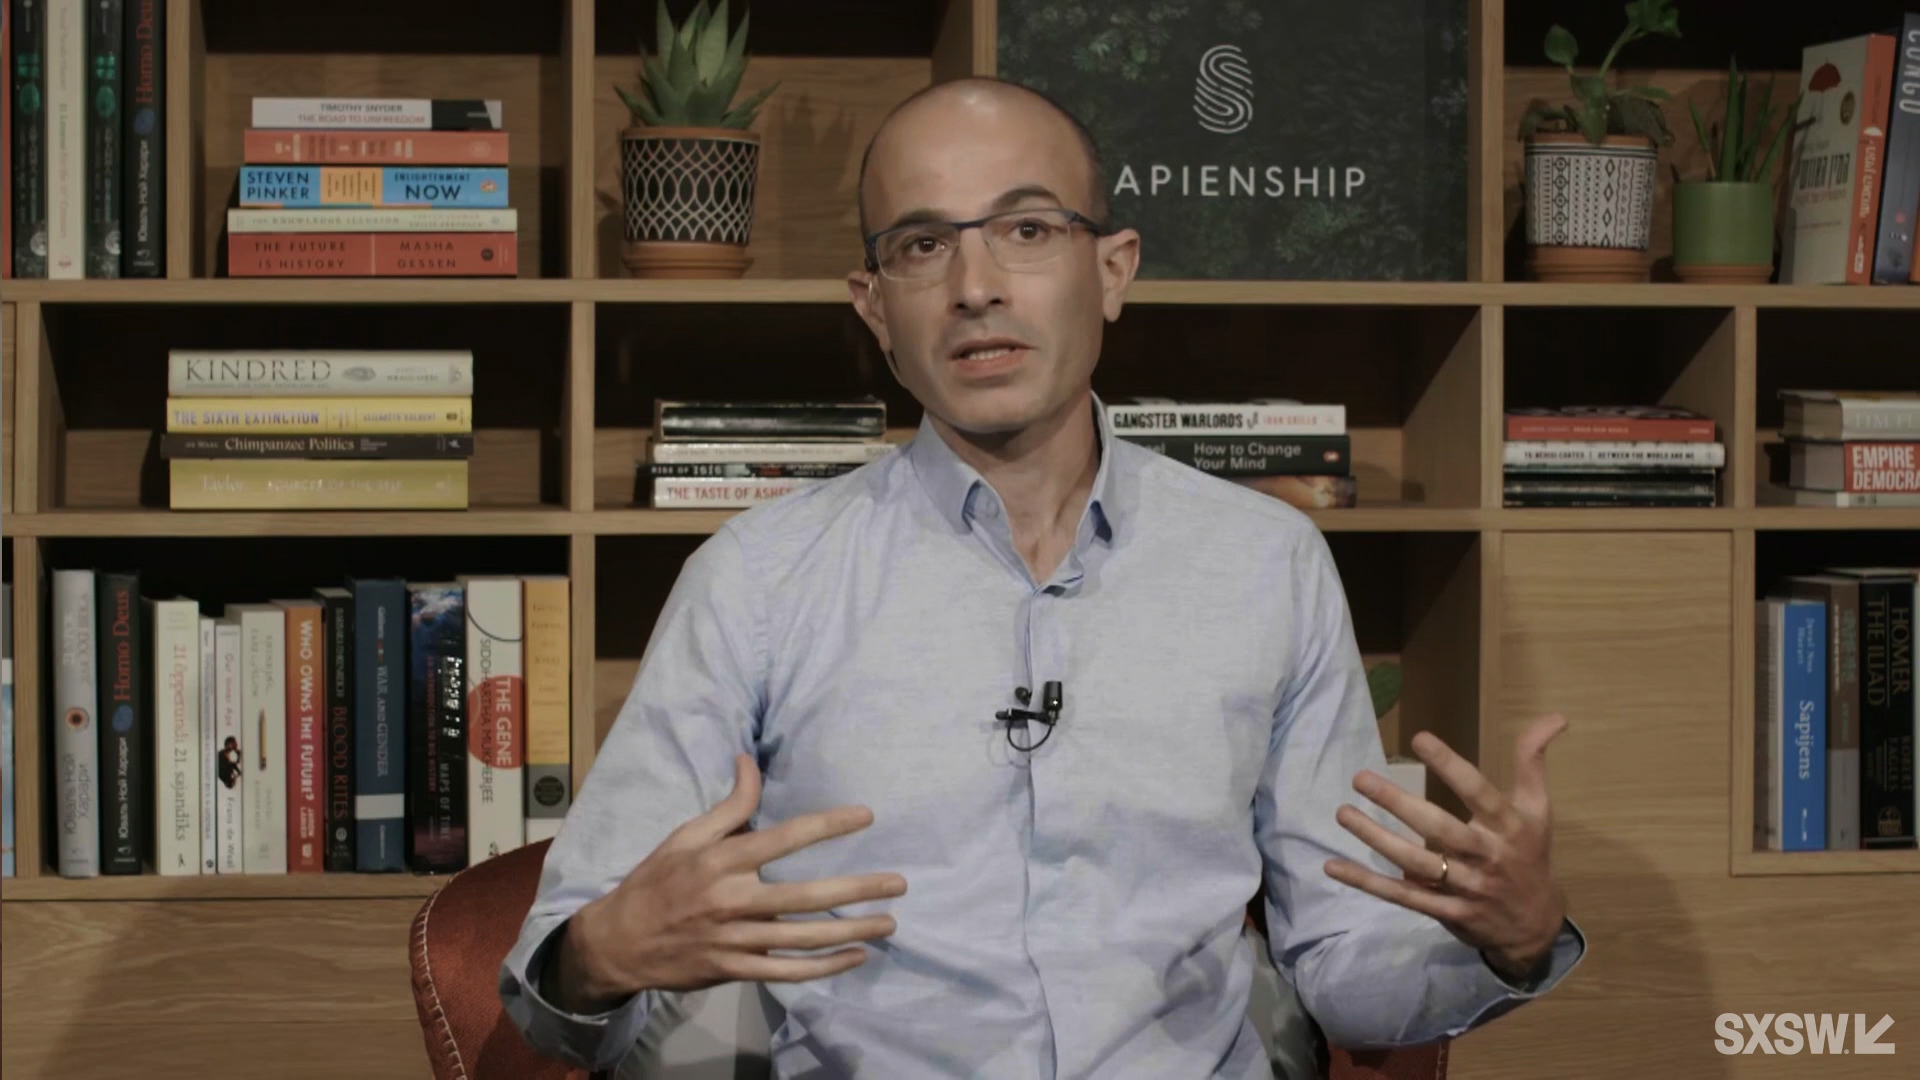 Yuval Noah Harari speaks at the featured session “Why Do We Fear Innovation?” during SXSW Online on March 17, 2021.